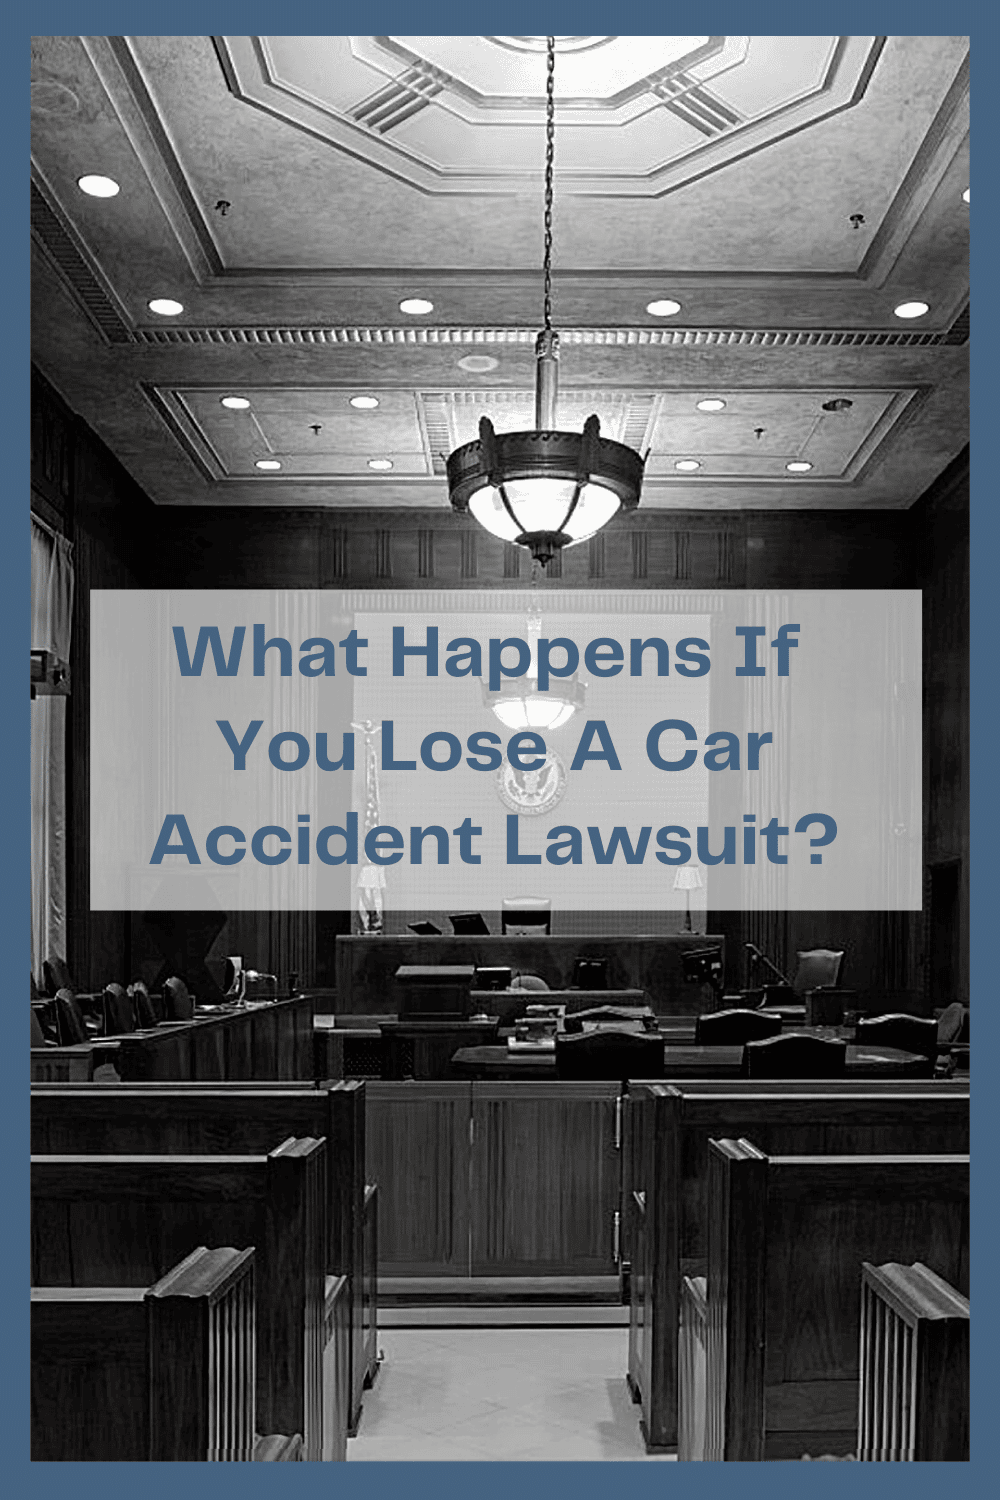 What Happens If You Lose A Car Accident Lawsuit?